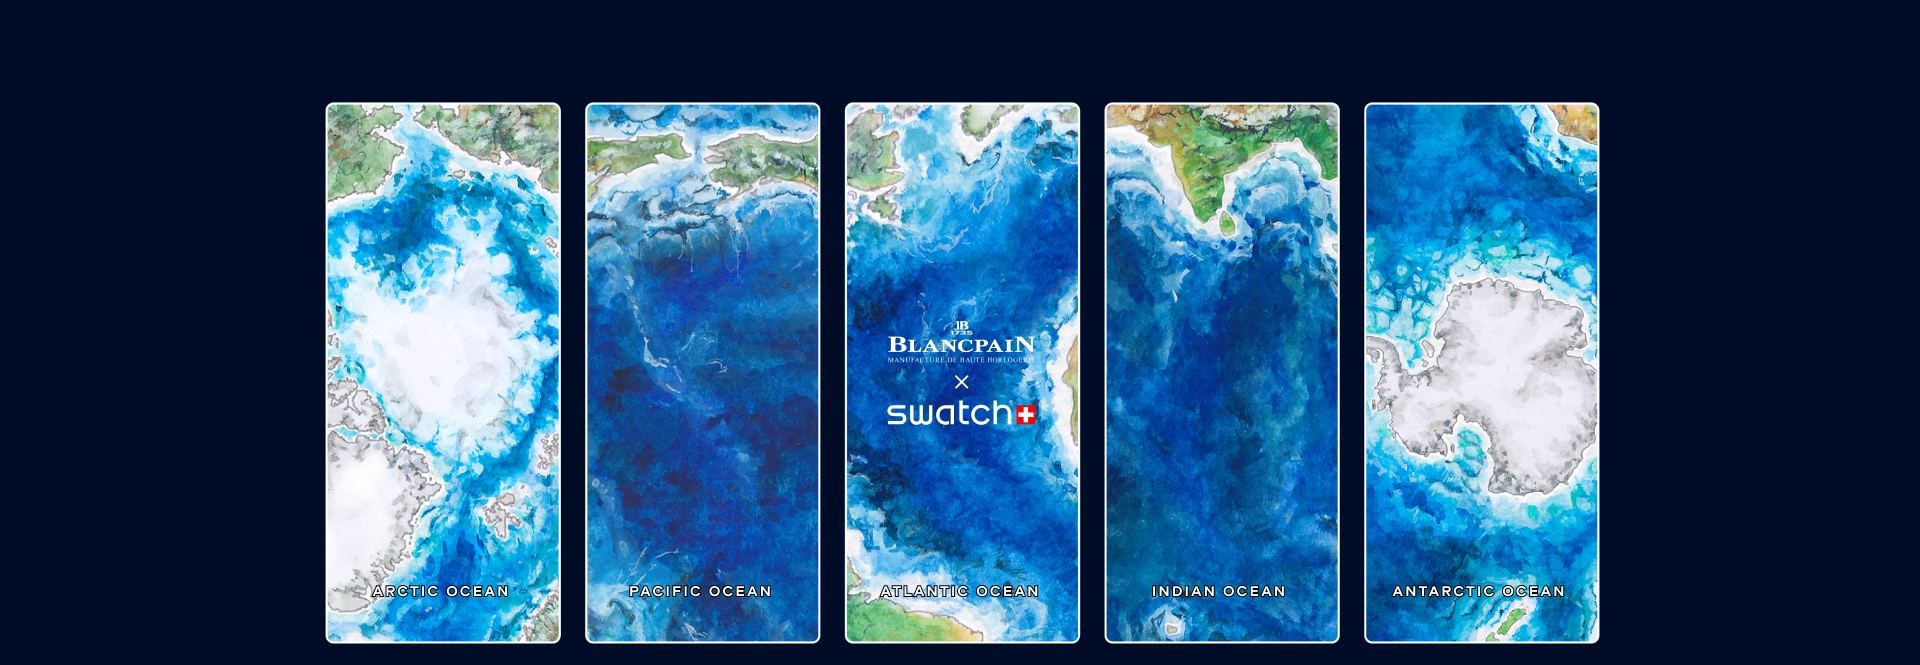 swatch collection banner